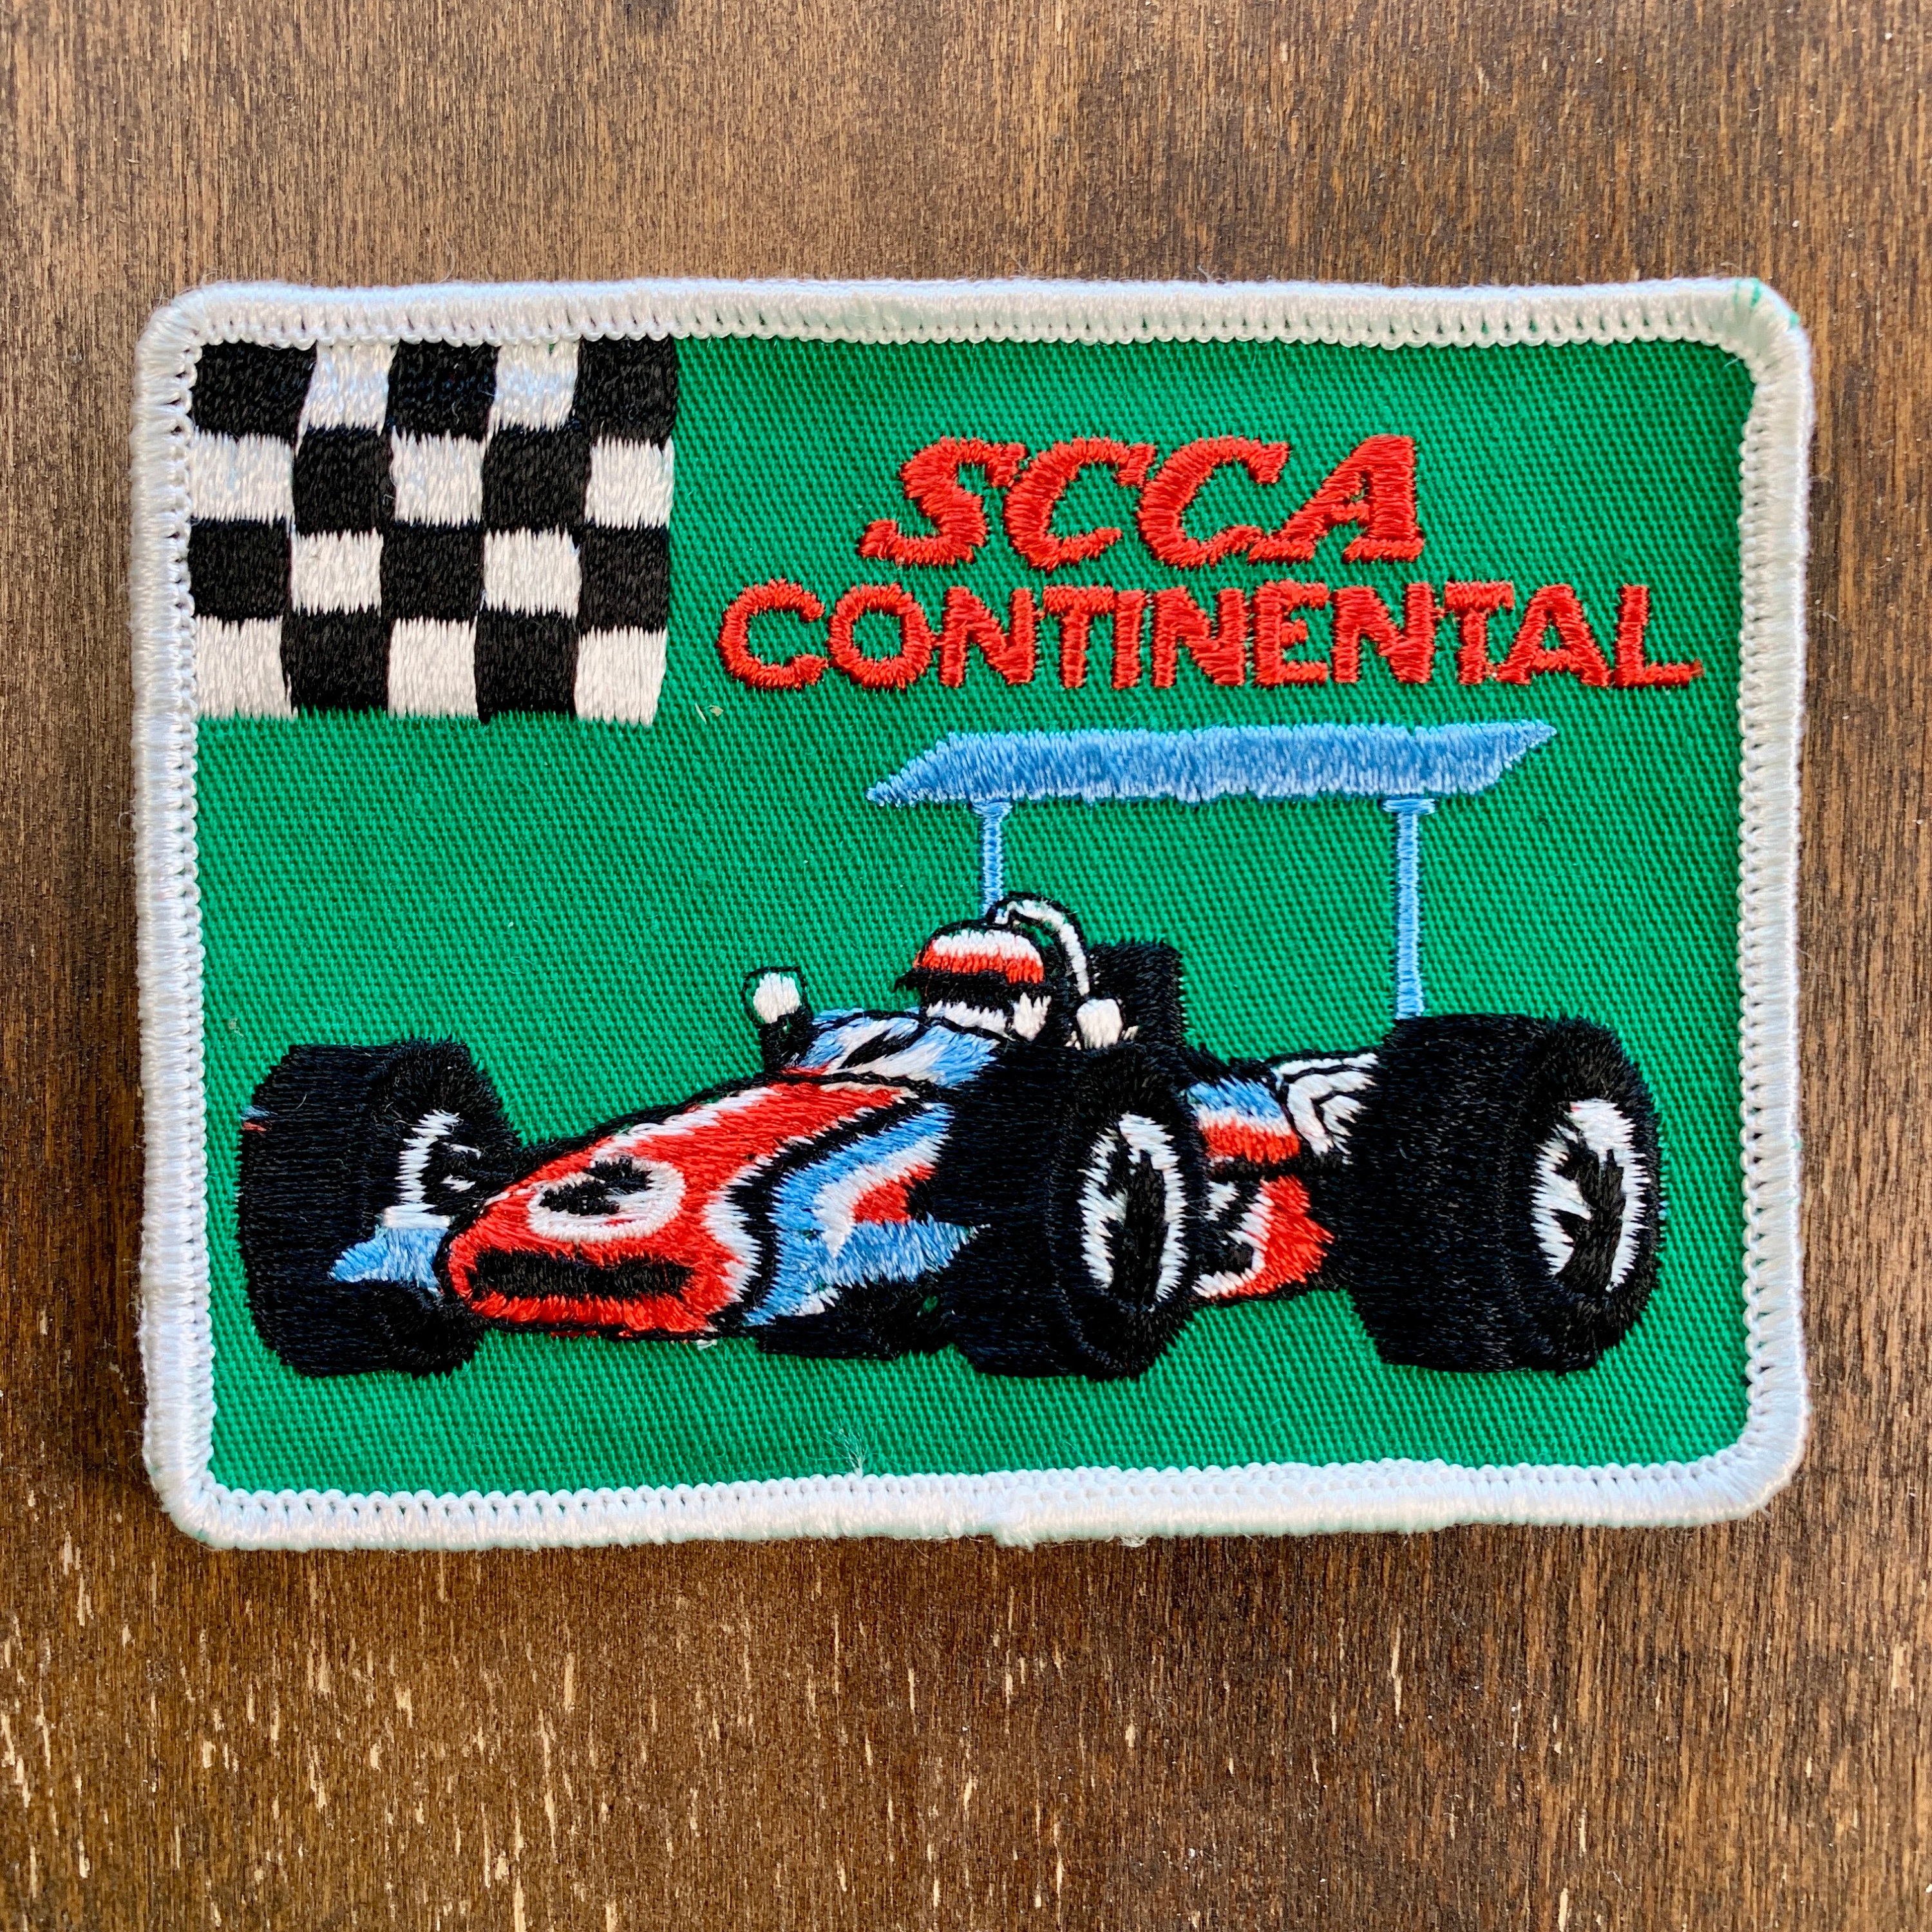 Race Belt, Embroidered patches manufacturer